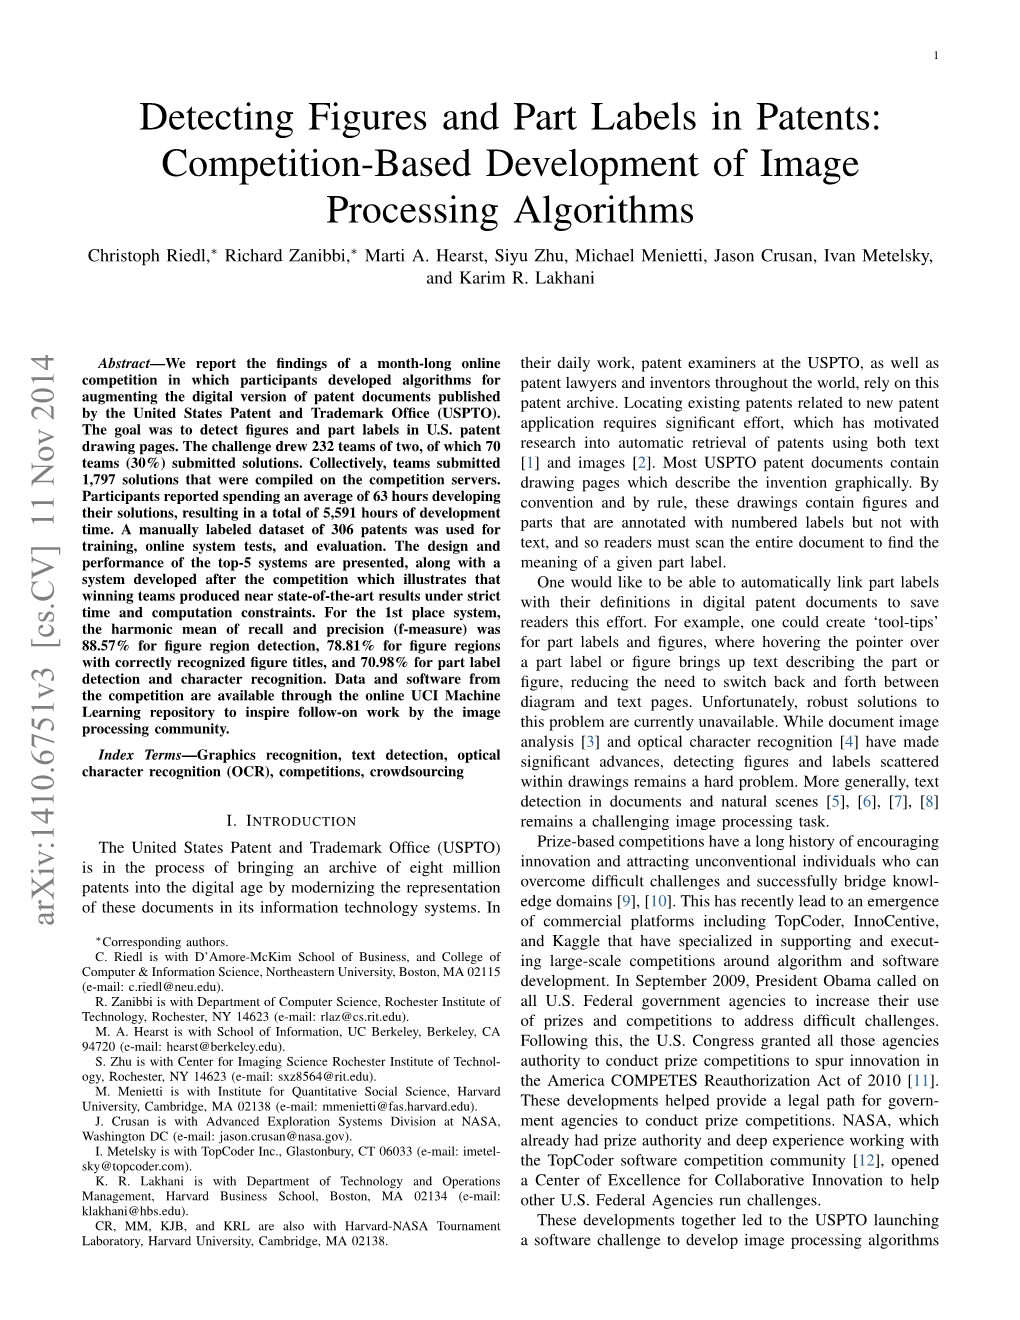 Detecting Figures and Part Labels in Patents: Competition-Based Development of Image Processing Algorithms